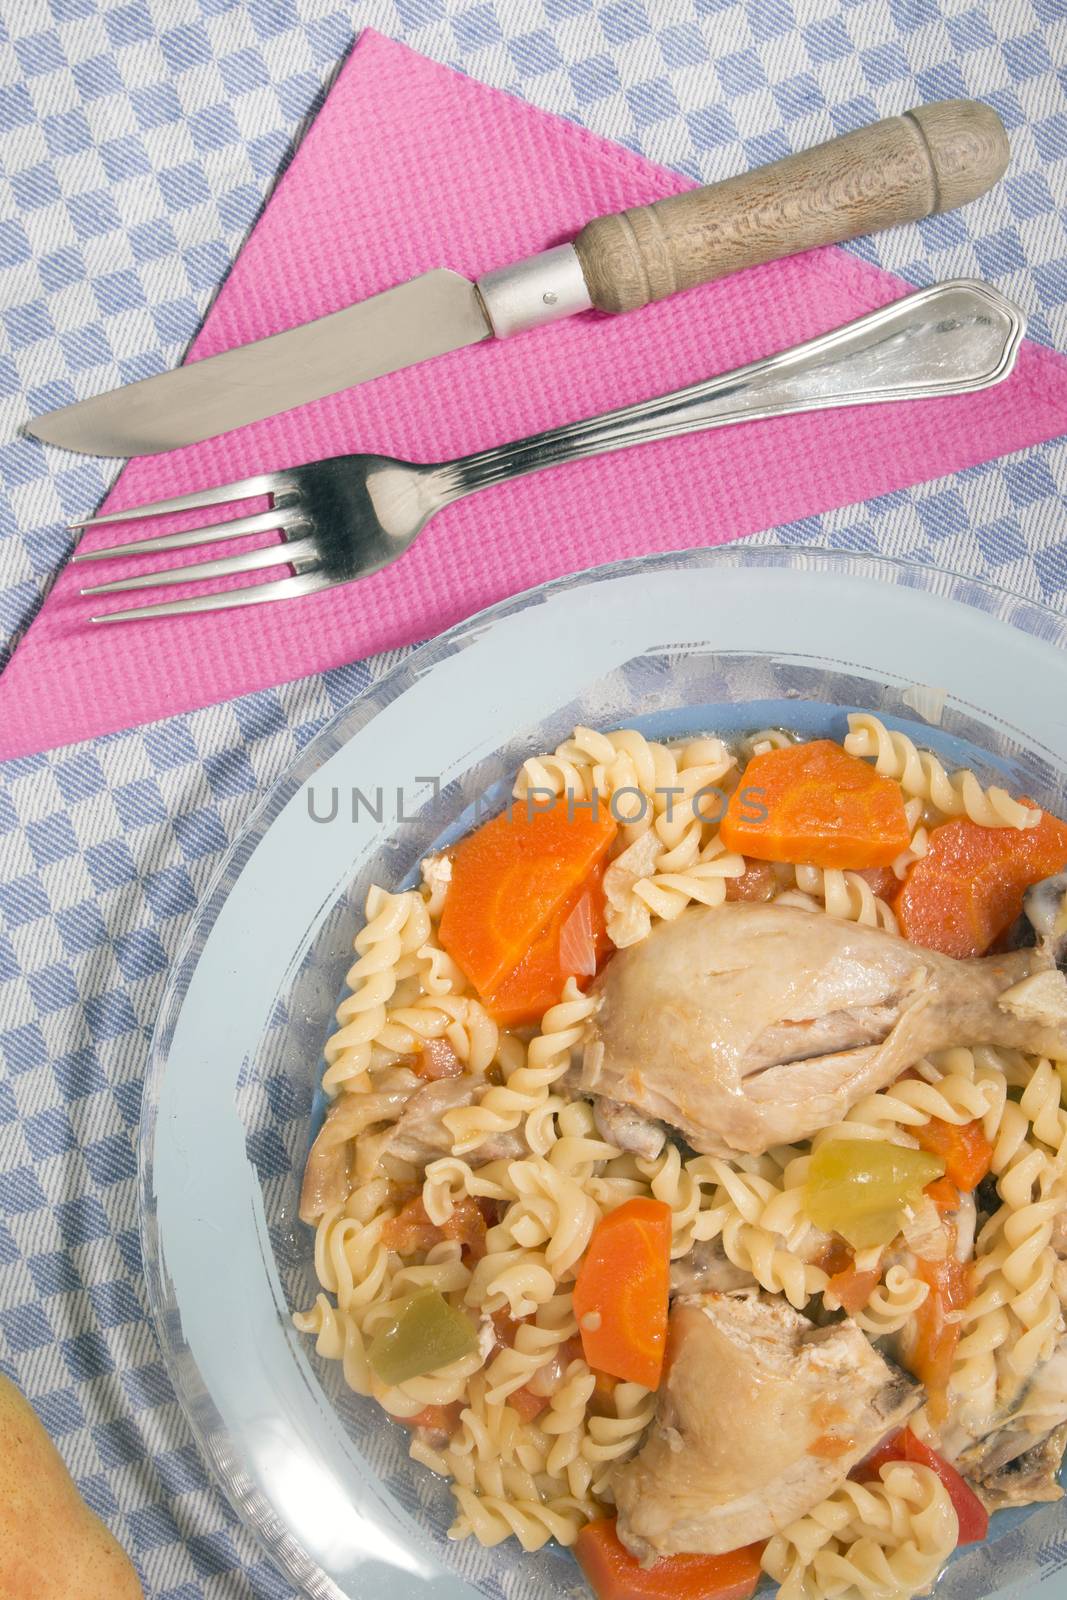 Typical Portuguese meal of Chicken with carrot and spaghetti.